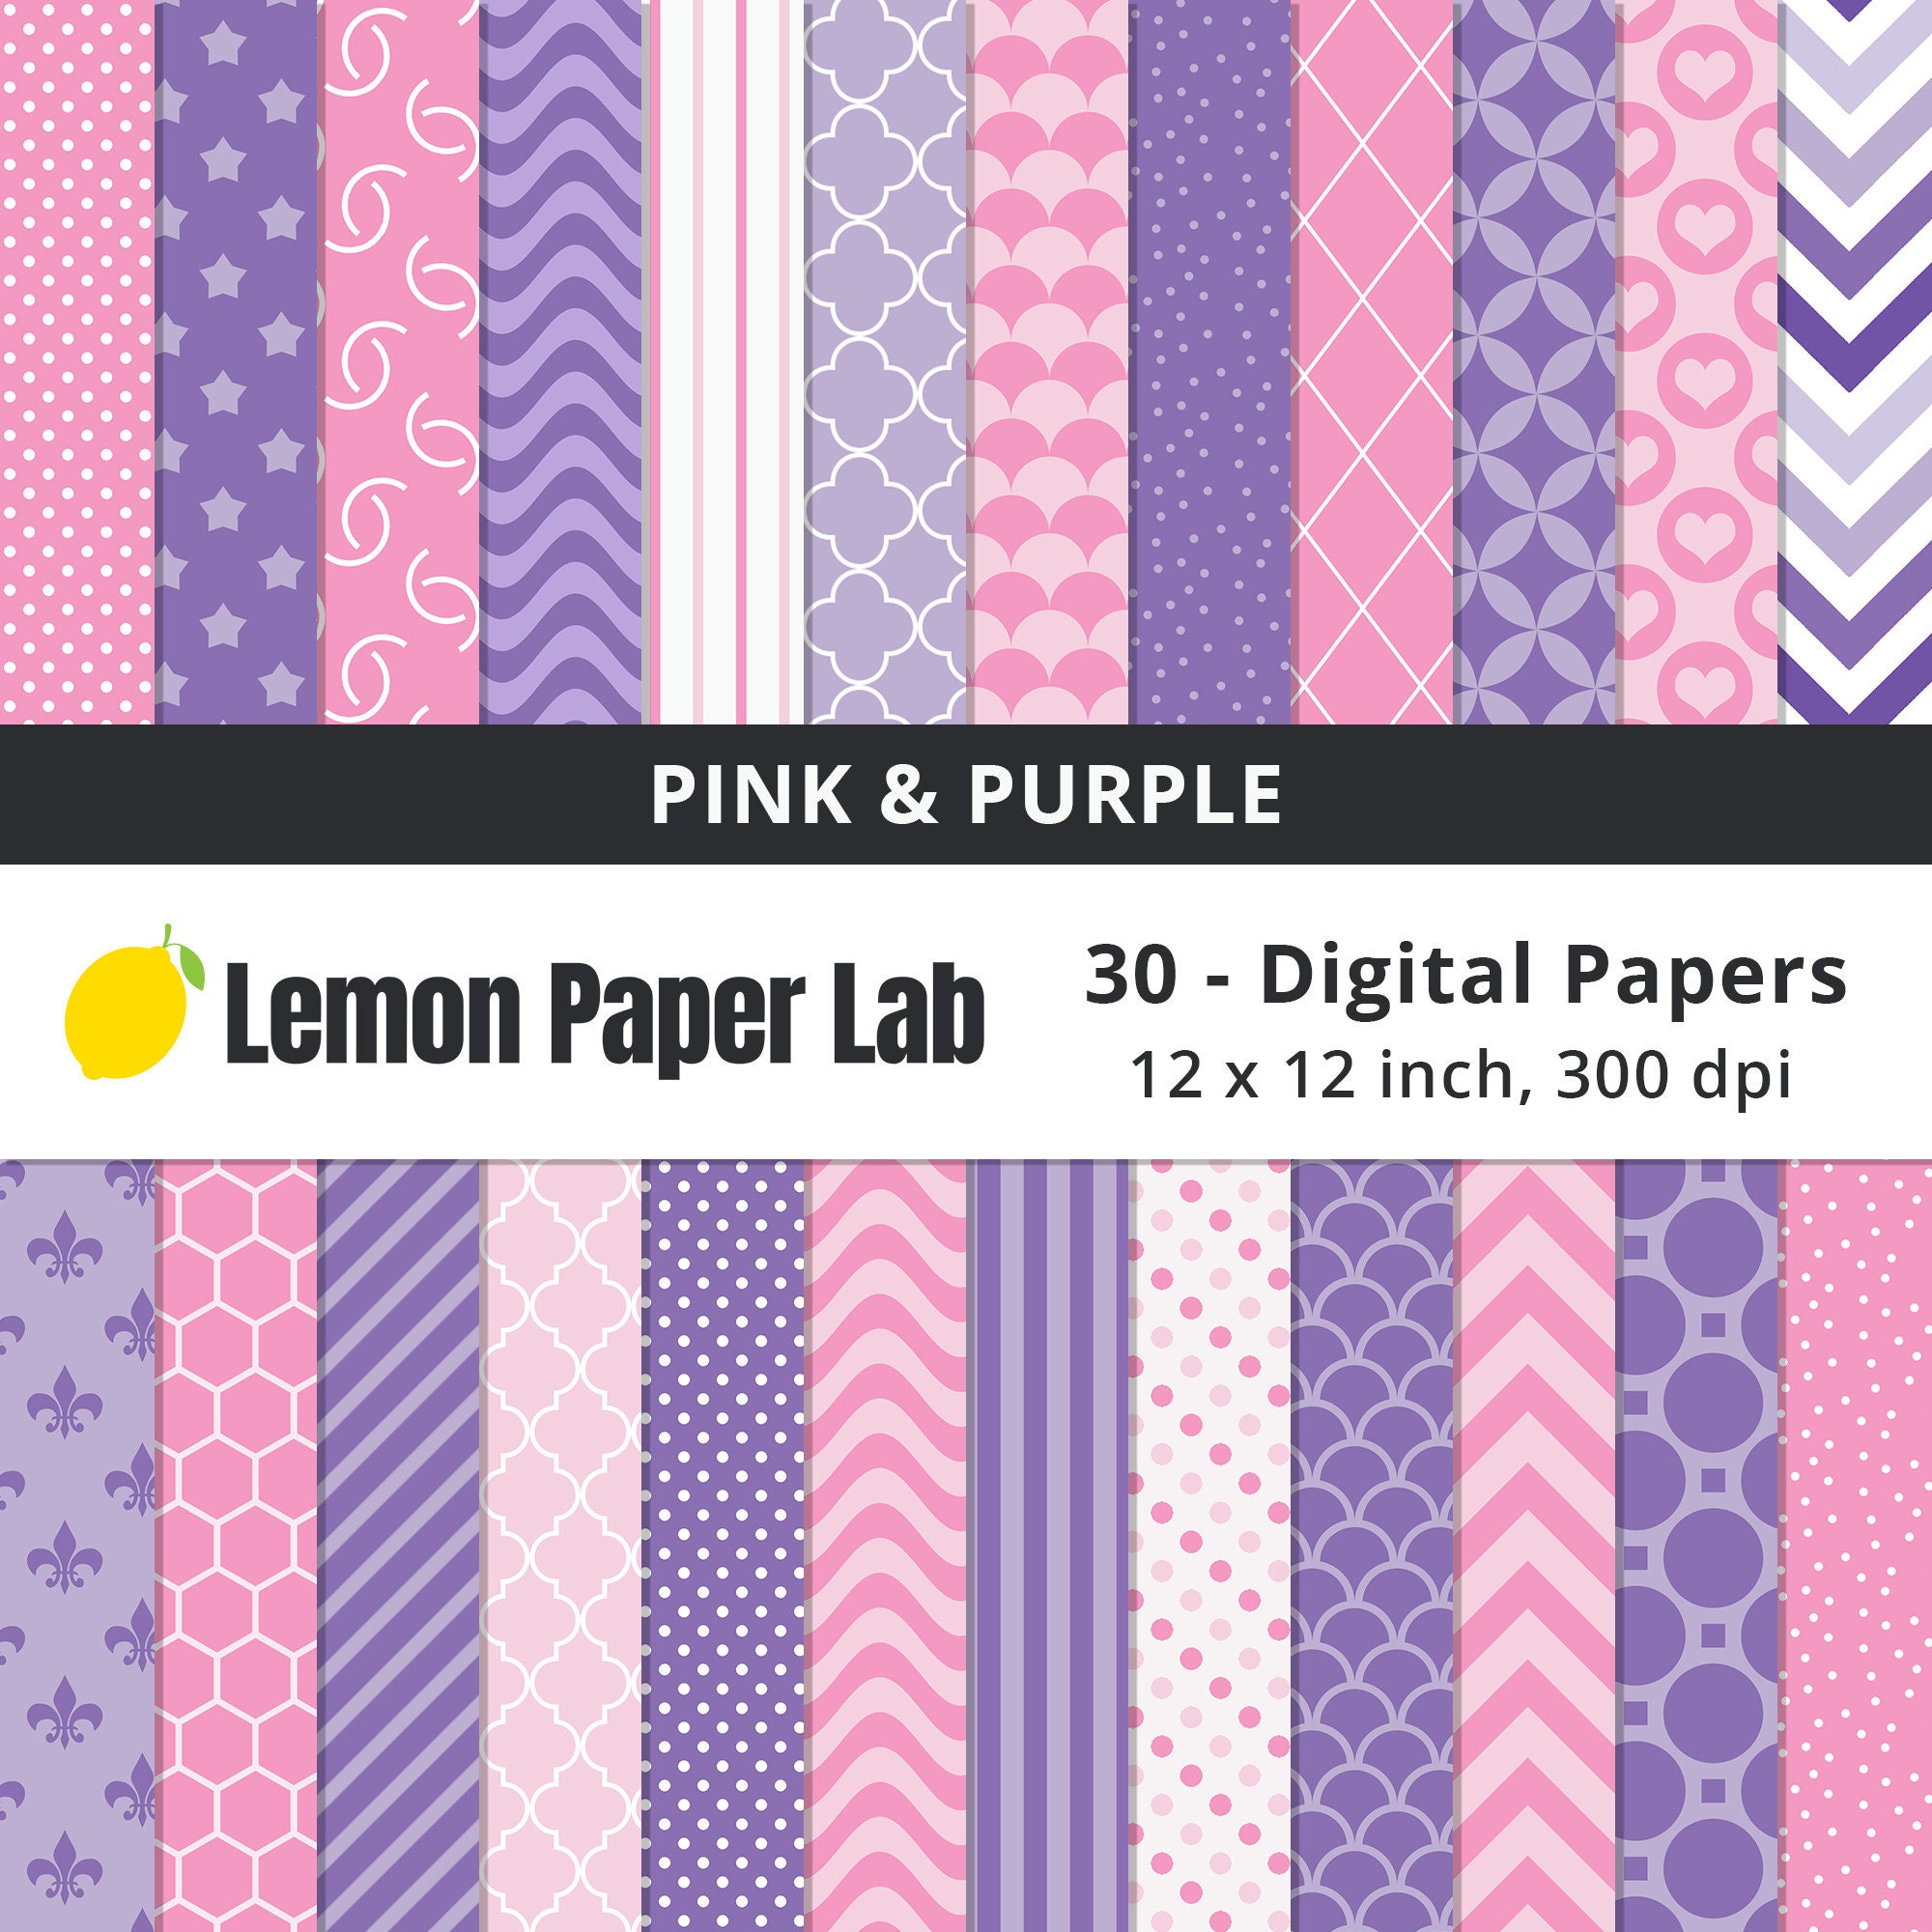 Light Pink and White Scrapbook Papers Graphic by Lemon Paper Lab